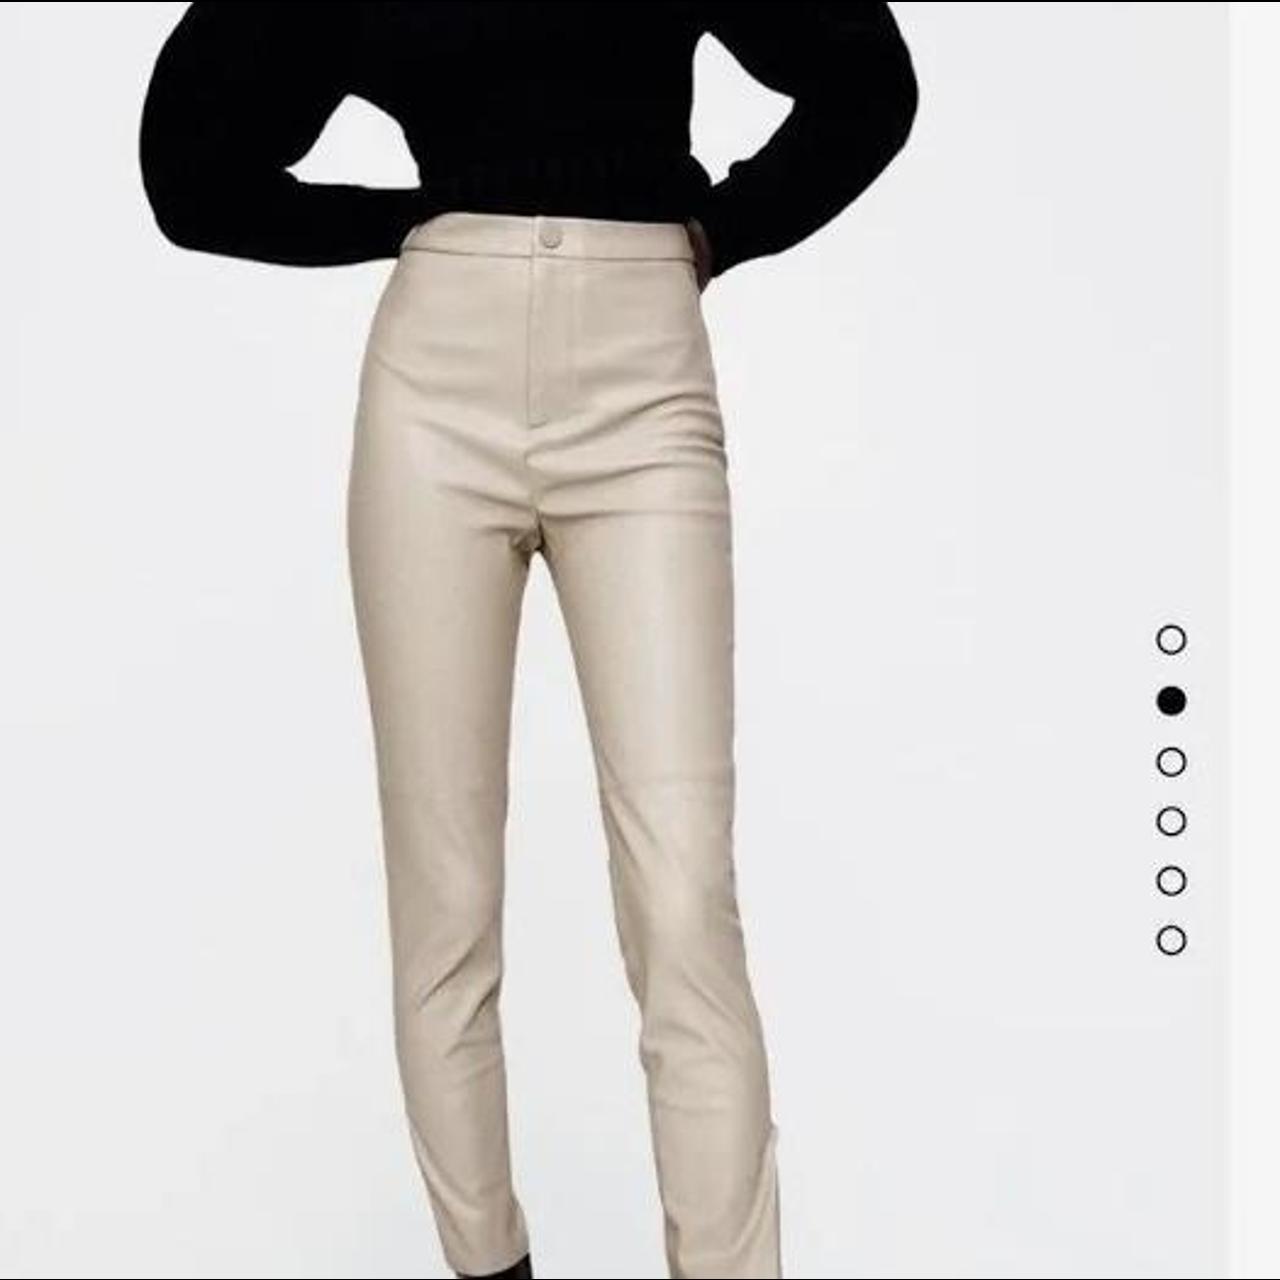 Zara faux leather pants discontinued!! So comfy worn